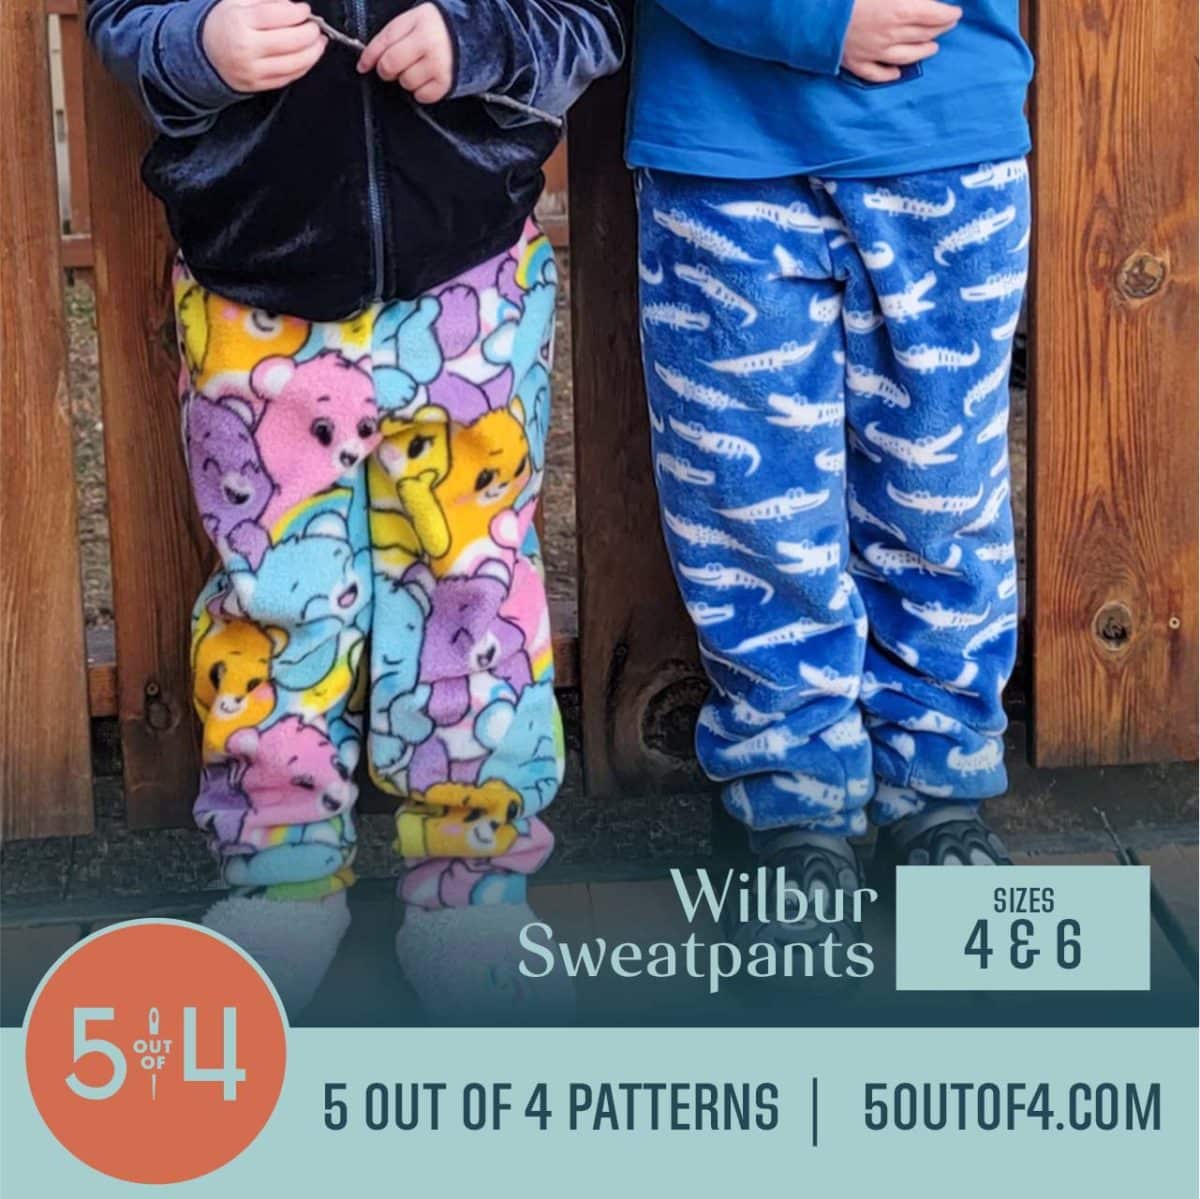 Wilbur Sweatpants - 5 out of 4 Patterns